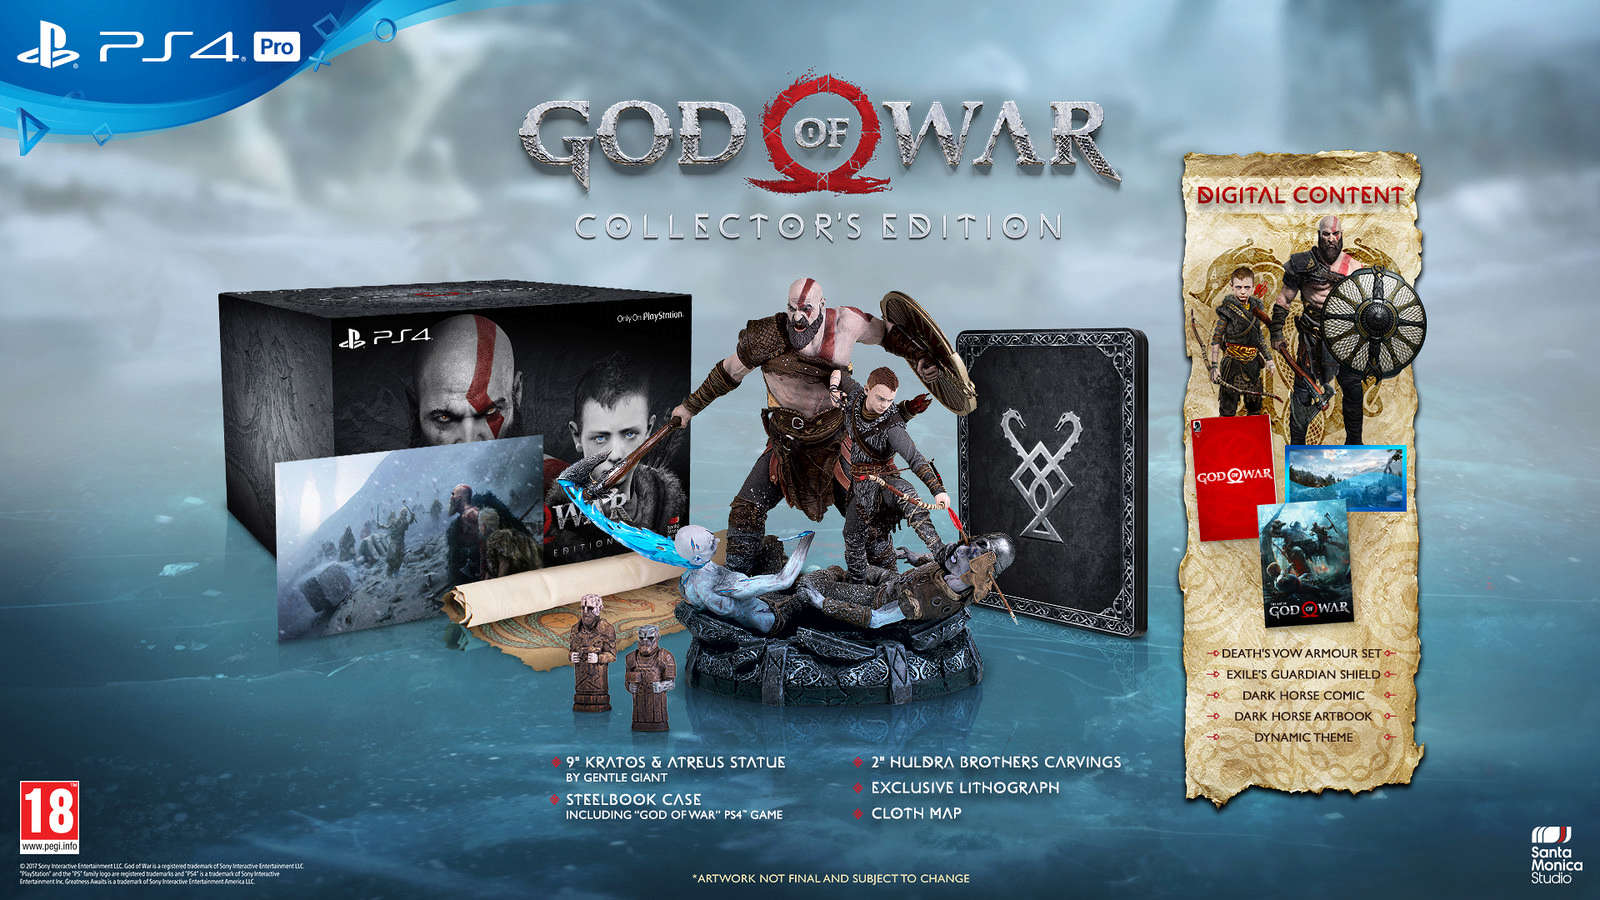 God of War - Collector's Edition